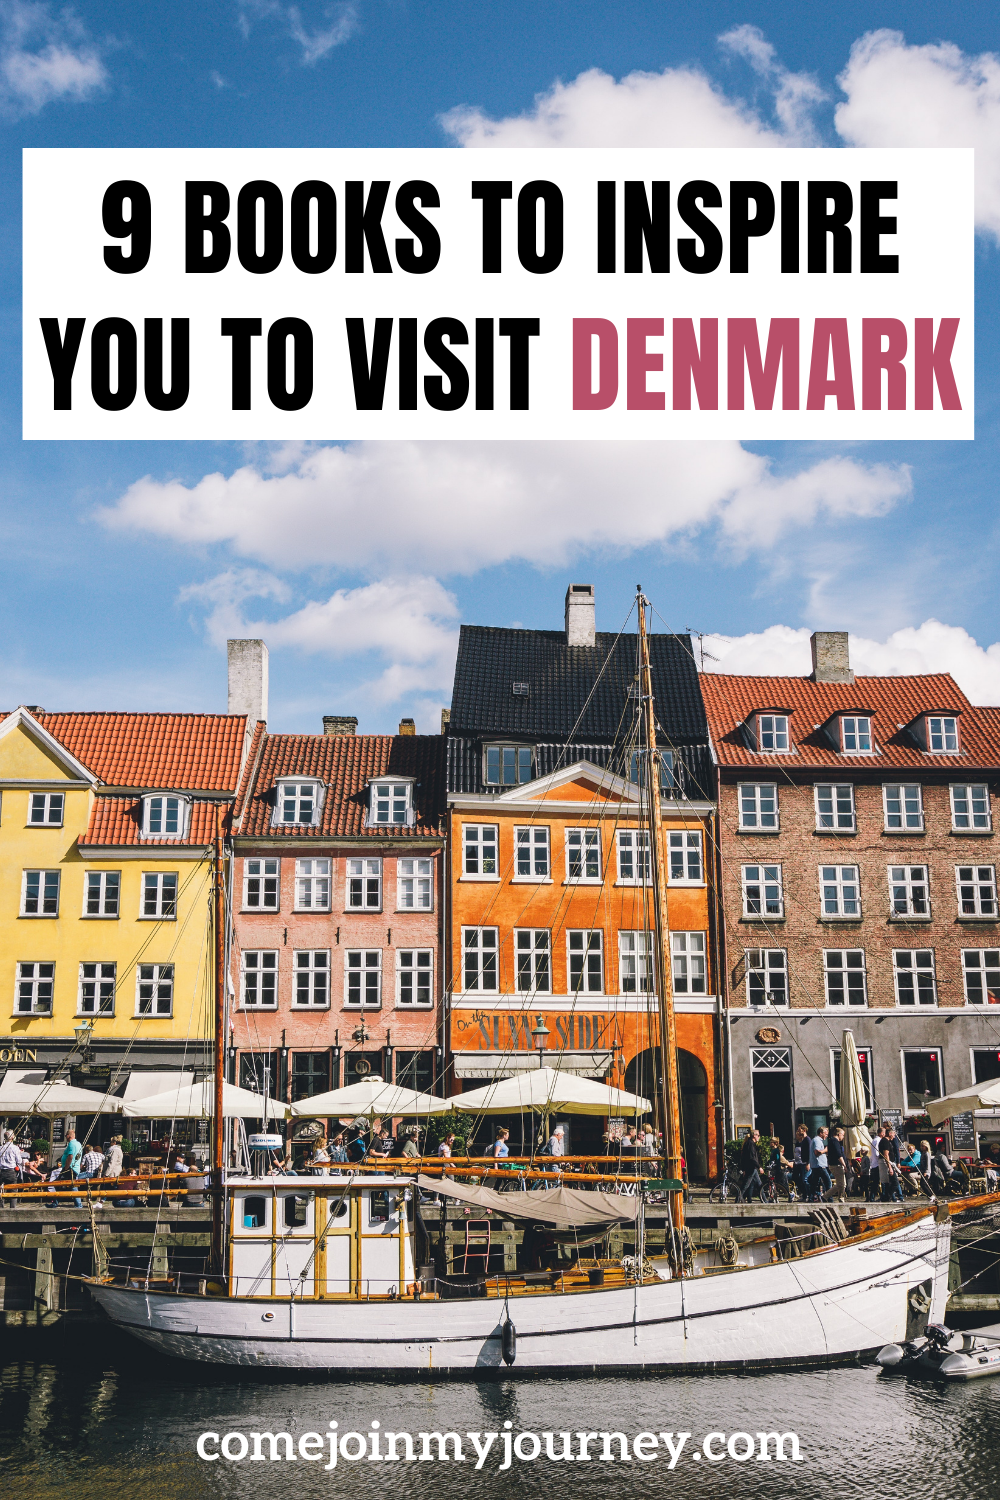 9 Books to Inspire You to Visit Denmark